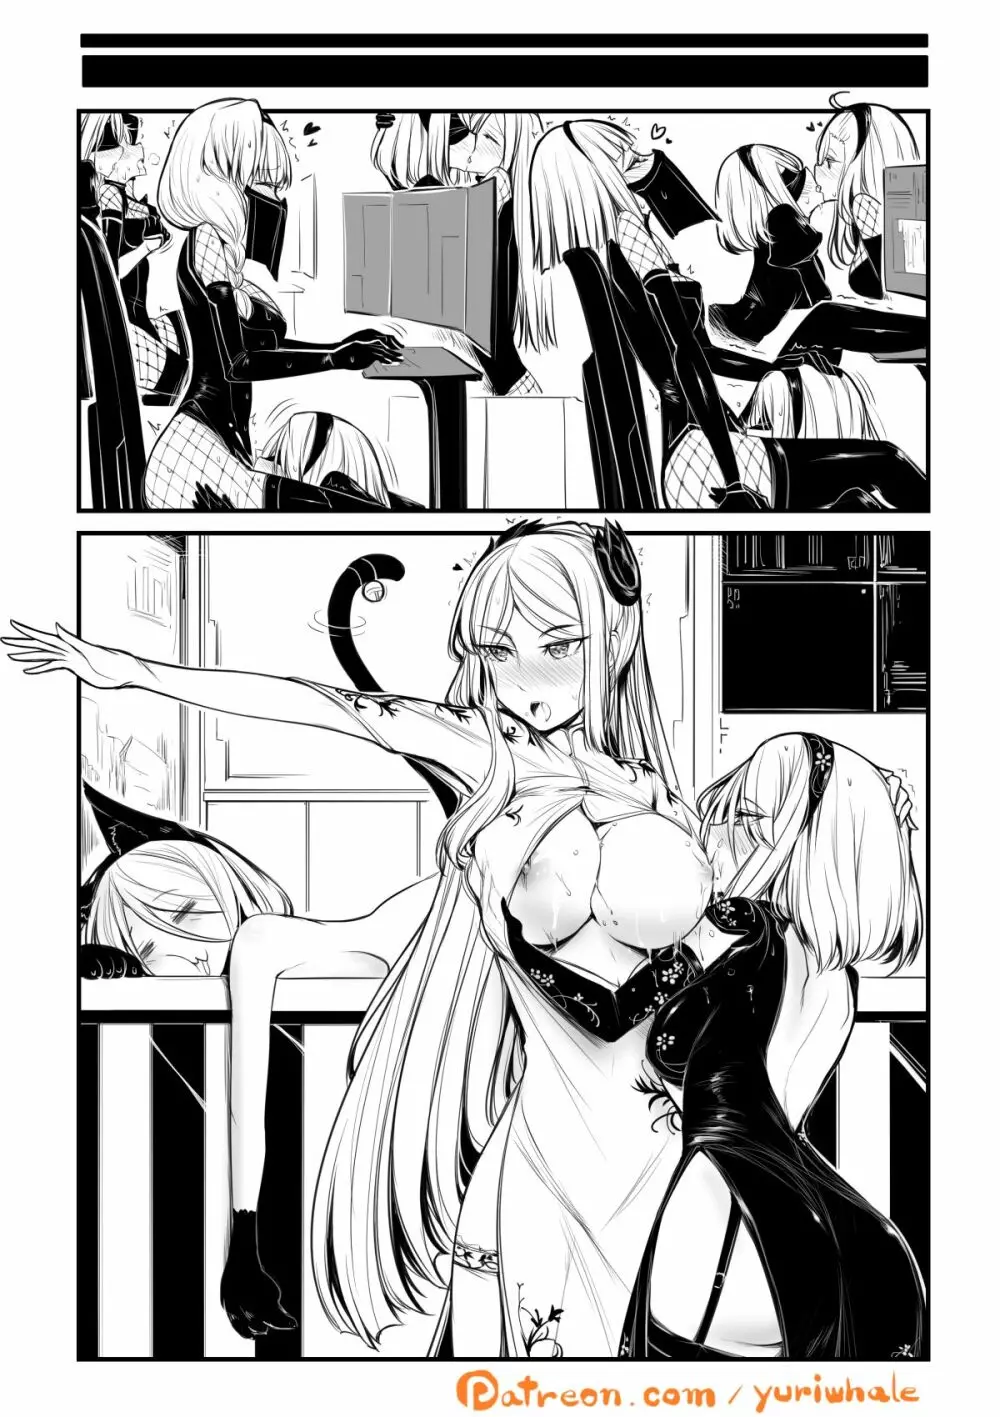 Nier : Automata Domina Commander X 2B X 6O 10 Pages Done 11ページ